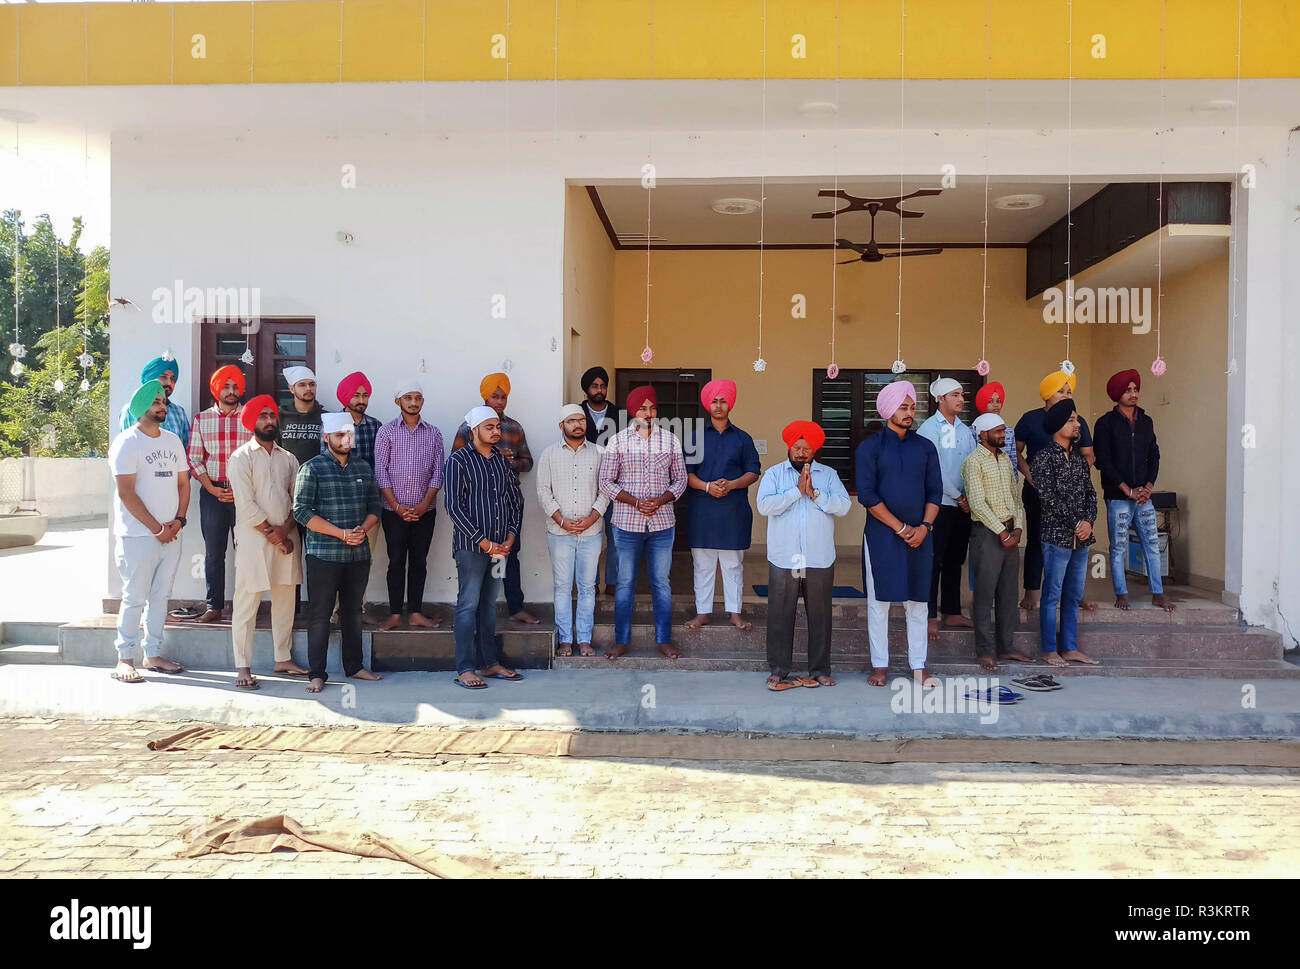 Mohali, Punjab, India. 23rd Nov, 2018. Sikh pilgrims are seen attending rituals during the occasion of the 550th birth anniversary of Guru Nanak Dev in Mohali.Sikhism was founded in the 15th century by Guru Nanak, who broke away from Hinduism, India's dominant religion, He preached the equality of races and genders and the rejection of image-worship and the caste system. Credit: Saqib Majeed/SOPA Images/ZUMA Wire/Alamy Live News Stock Photo